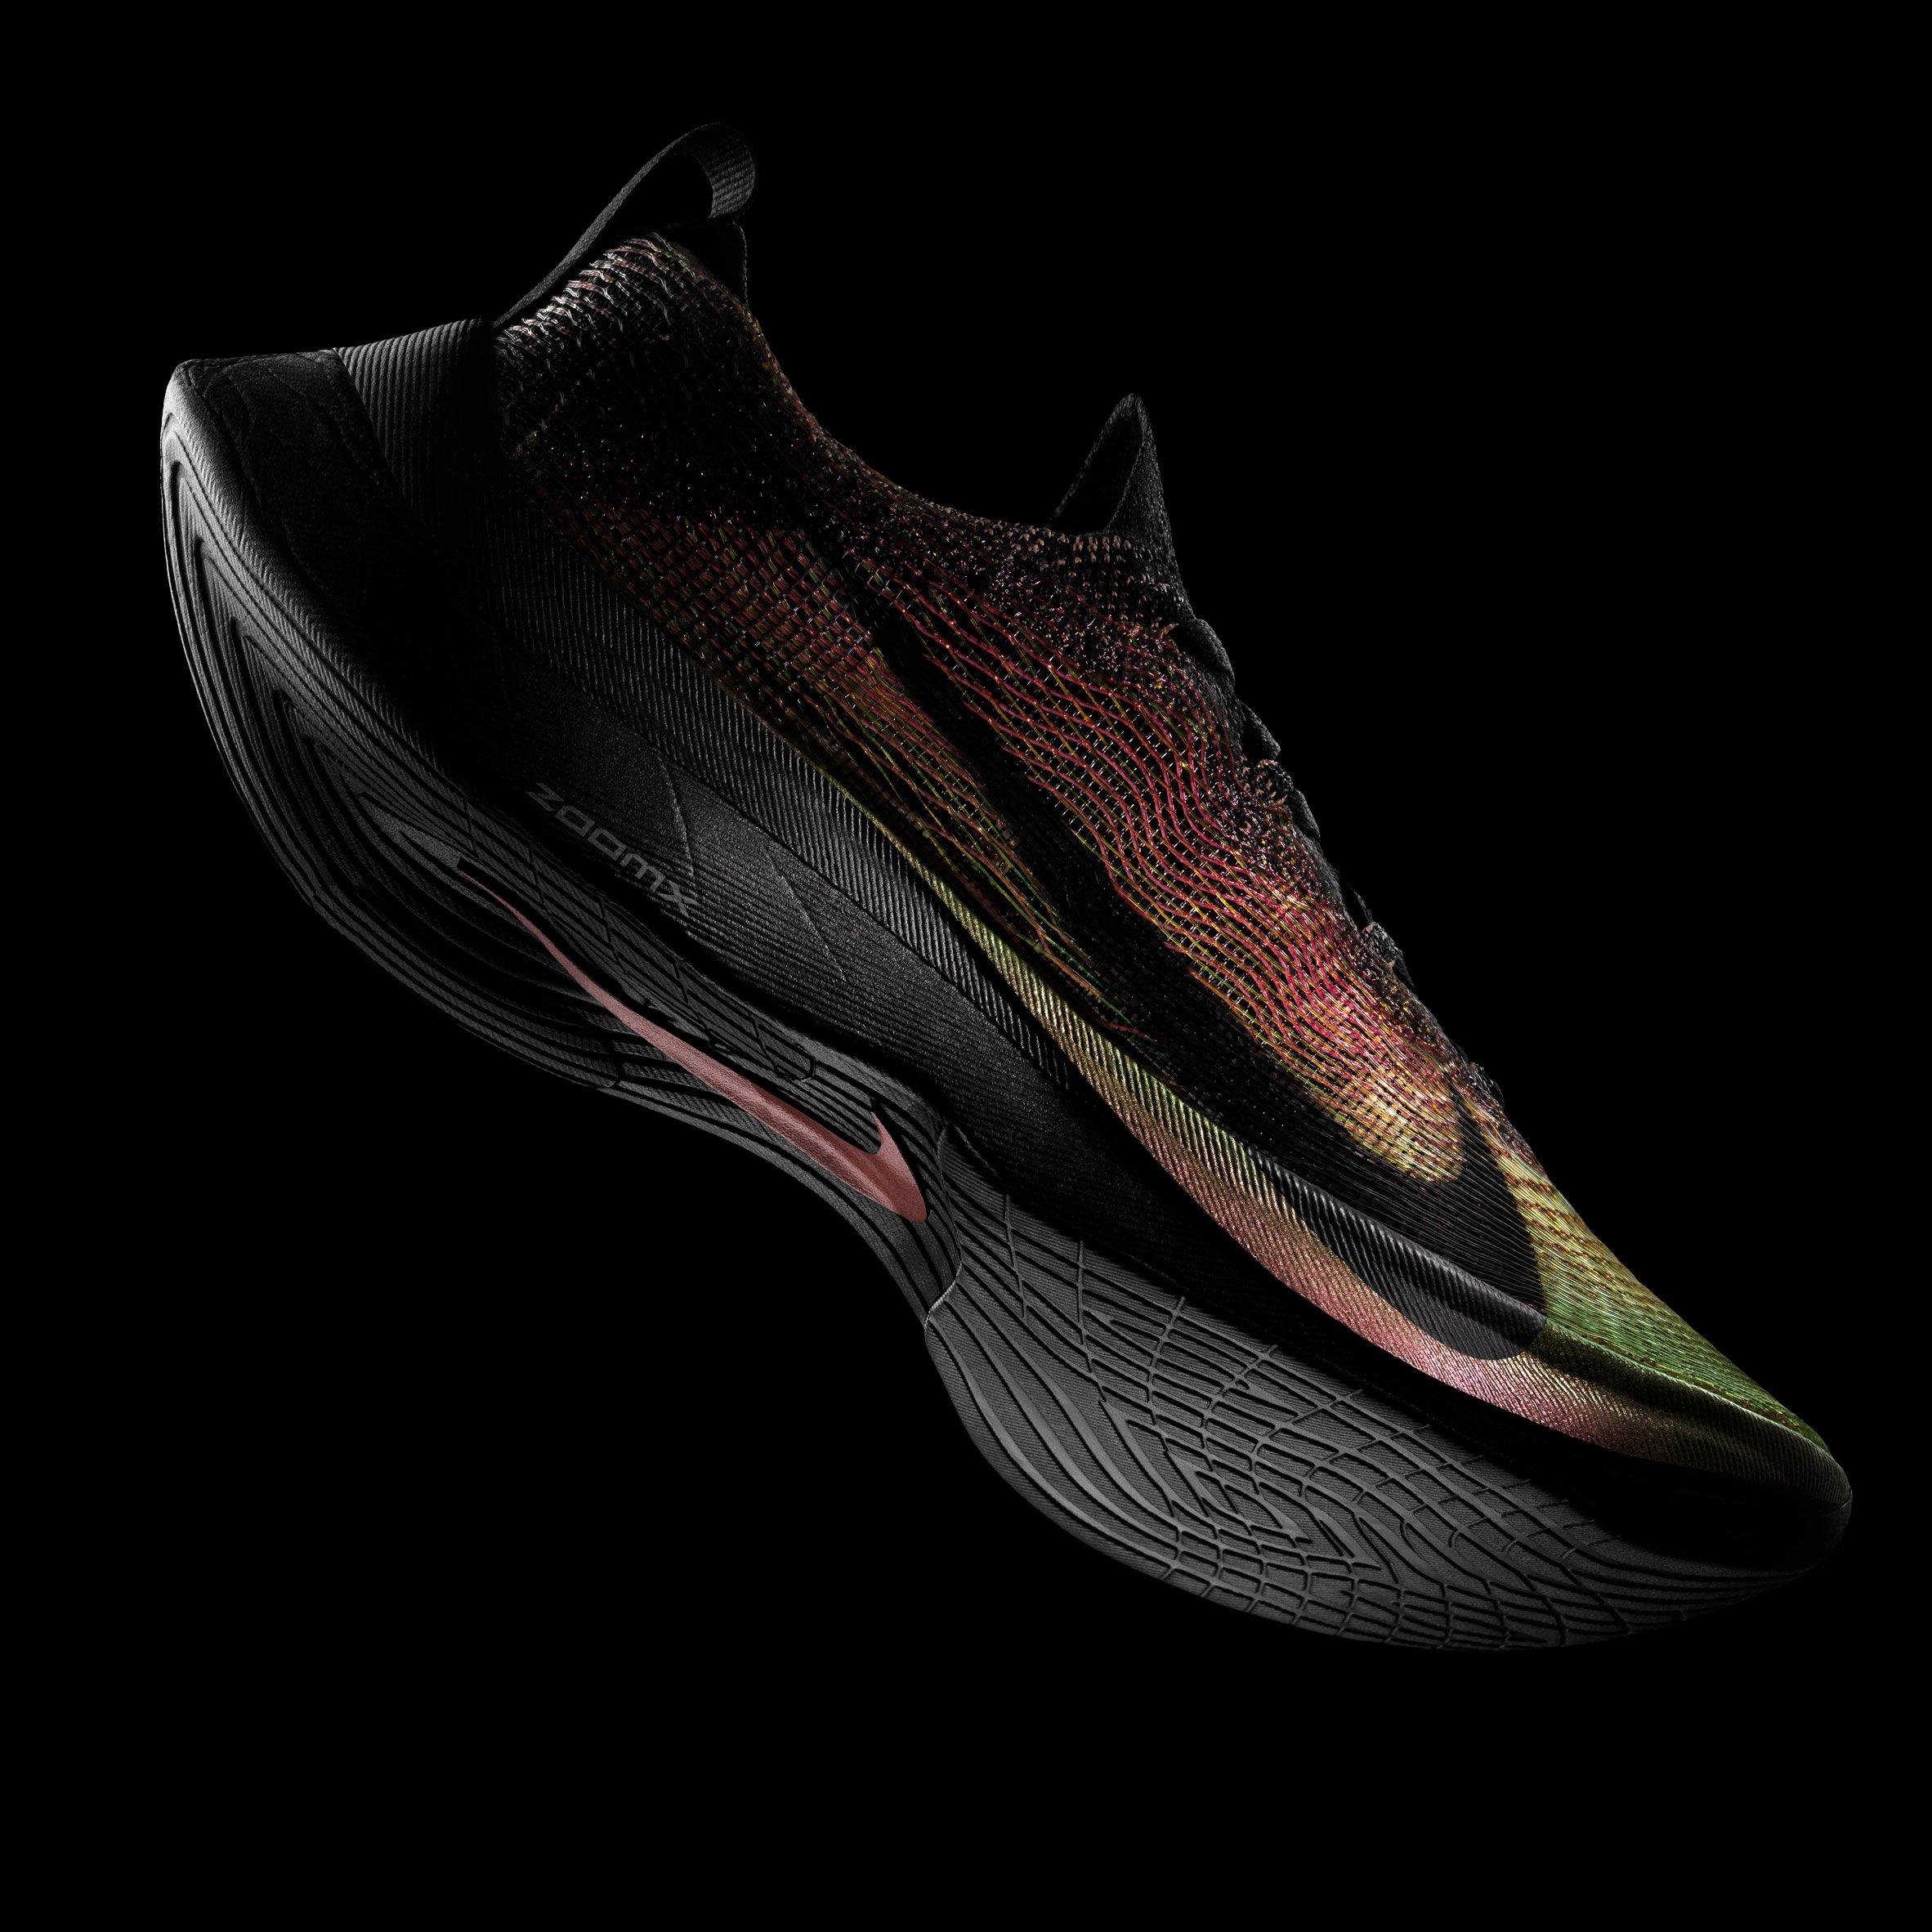 Abrasivo vesícula biliar restaurante Nike unveils "world's first" running shoes with 3D-printed uppers